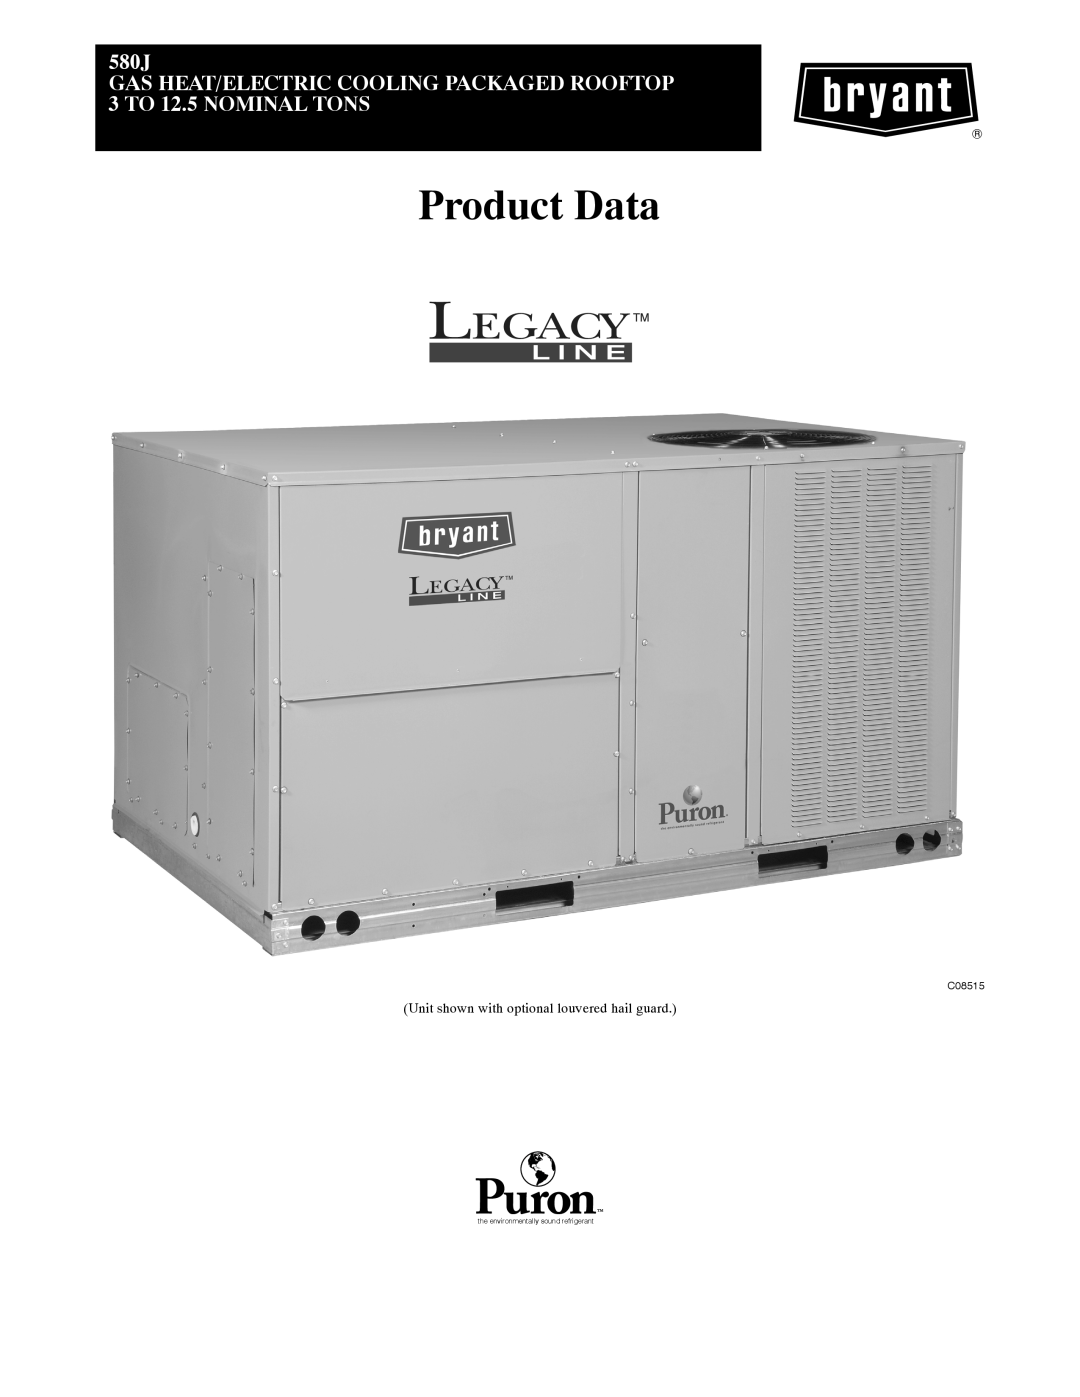 Bryant 580J manual Product Data, Unit shown with optional louvered hail guard, C08515 